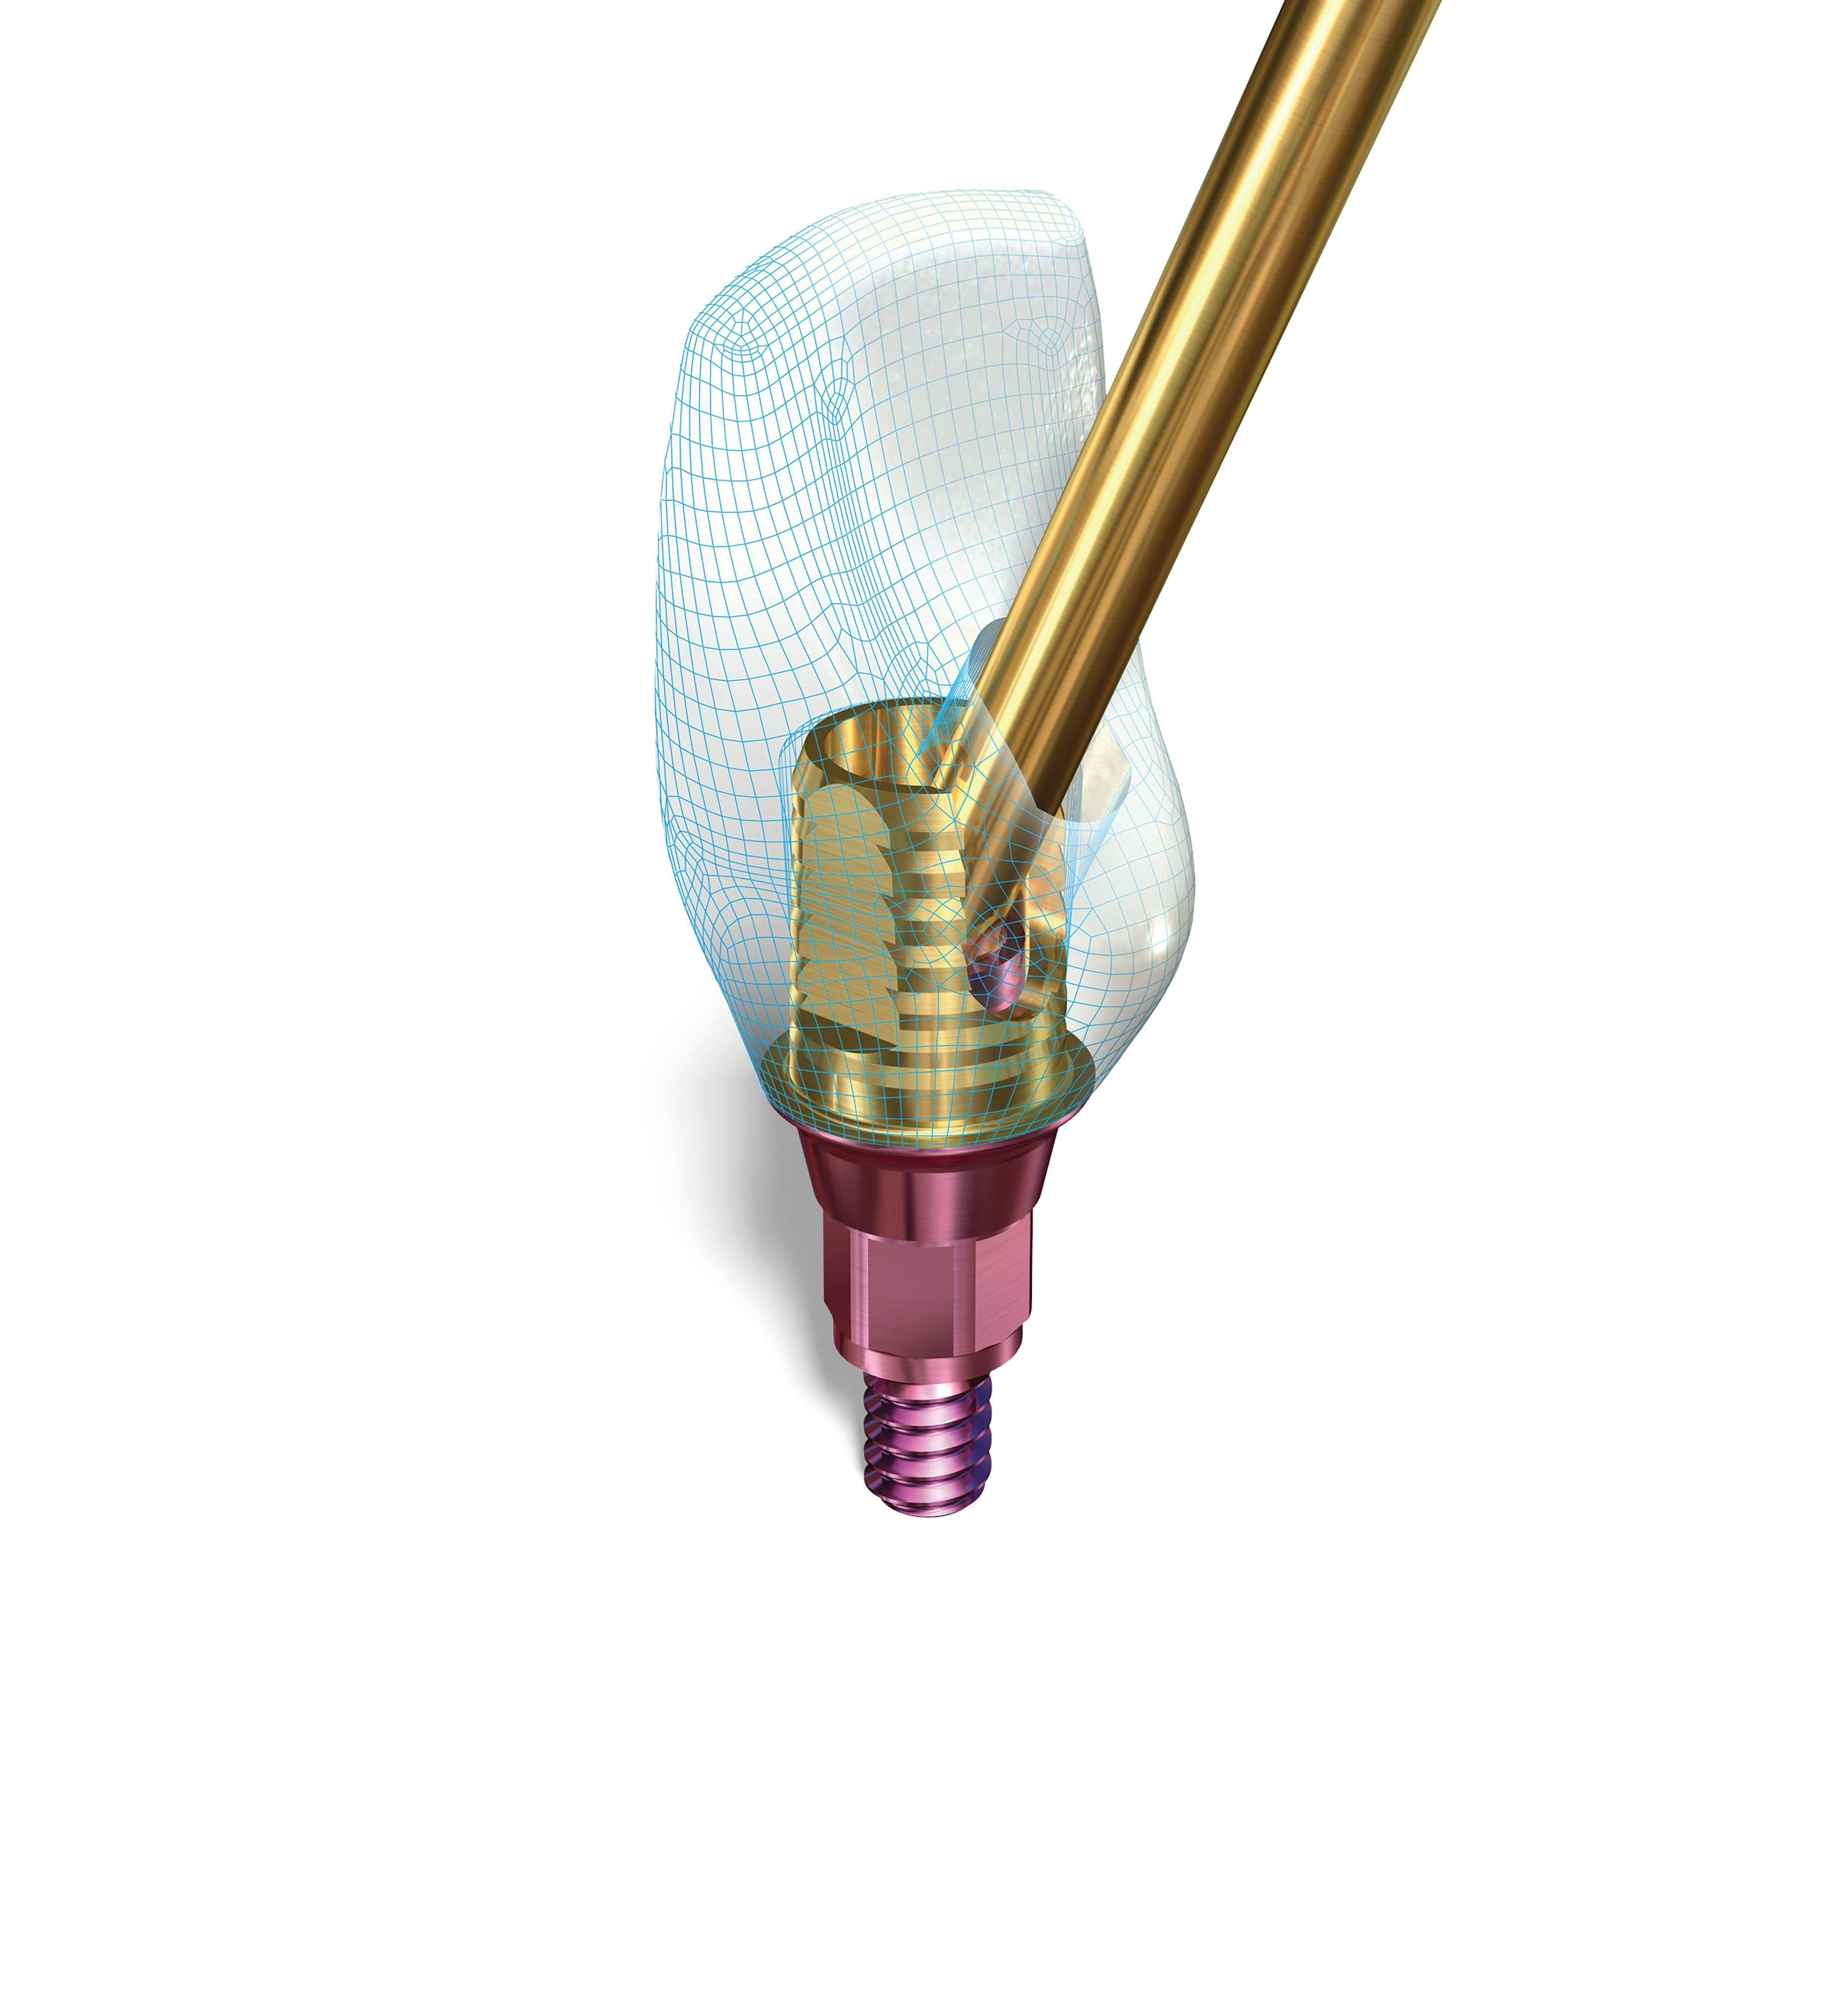 SMARTbase from Implant Direct